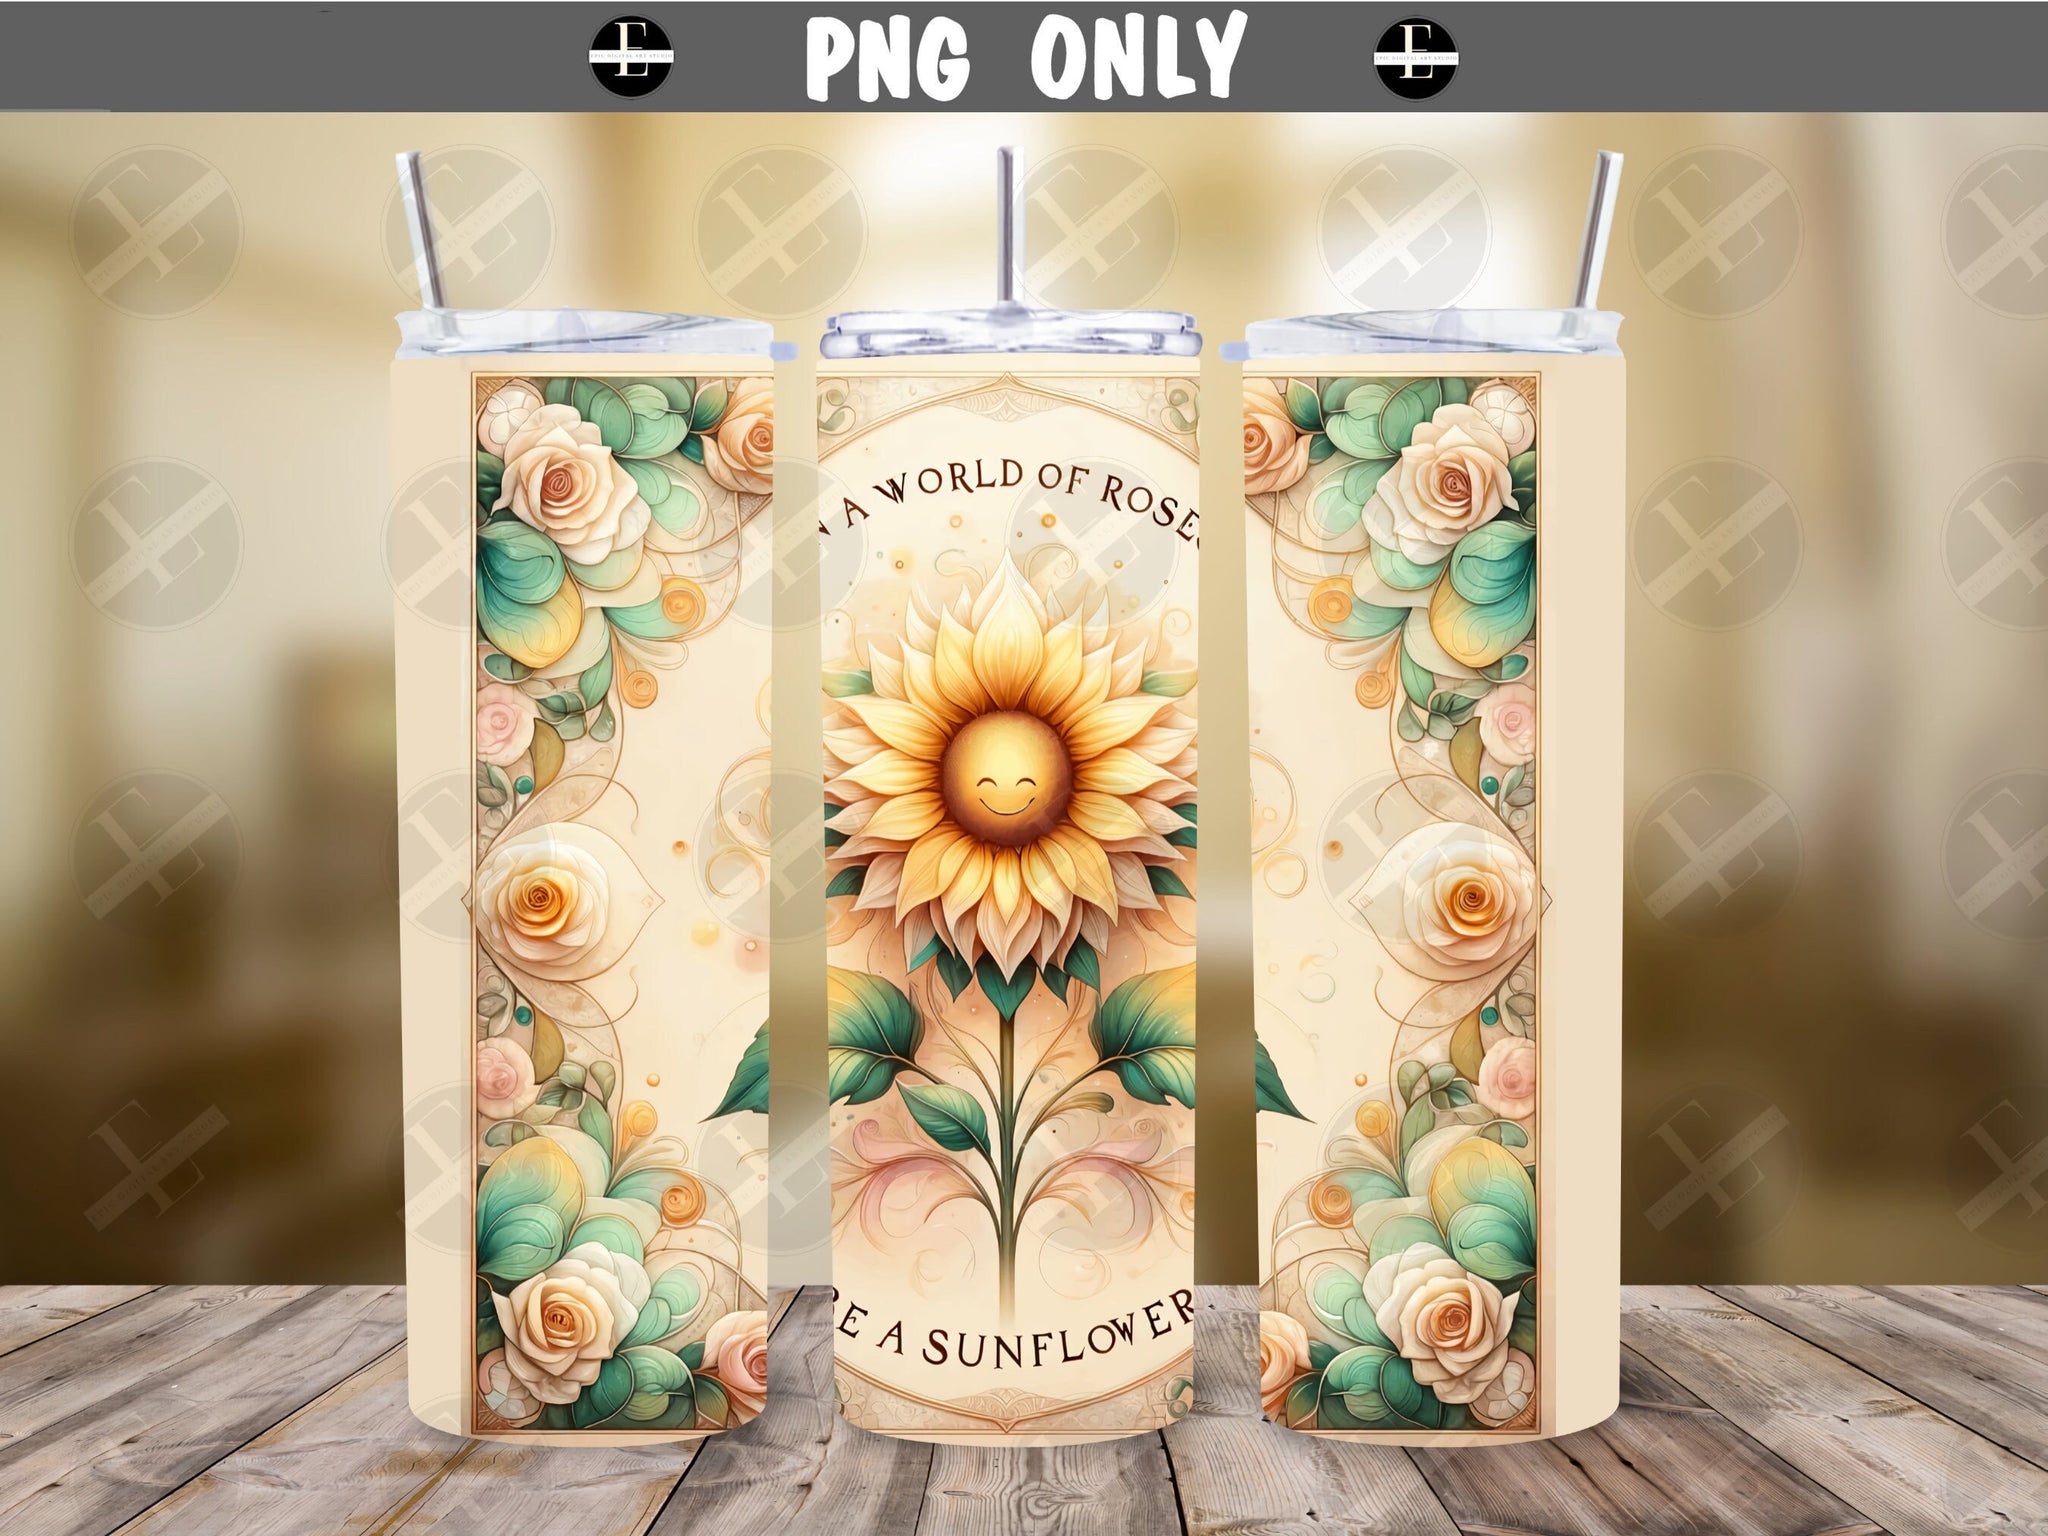 in a world of roses be a sunflower tumbler wrap, 20ozs wrap design, 20ozs skinny wraps, 20ozs wraps designs, tumbler 20ozs wraps, tumbler wrap 20ozs, wrap design 20ozs, wrap png design 20ozs, 20ozs wraps, 20ozs wrap, 20ozs tumbler wrap